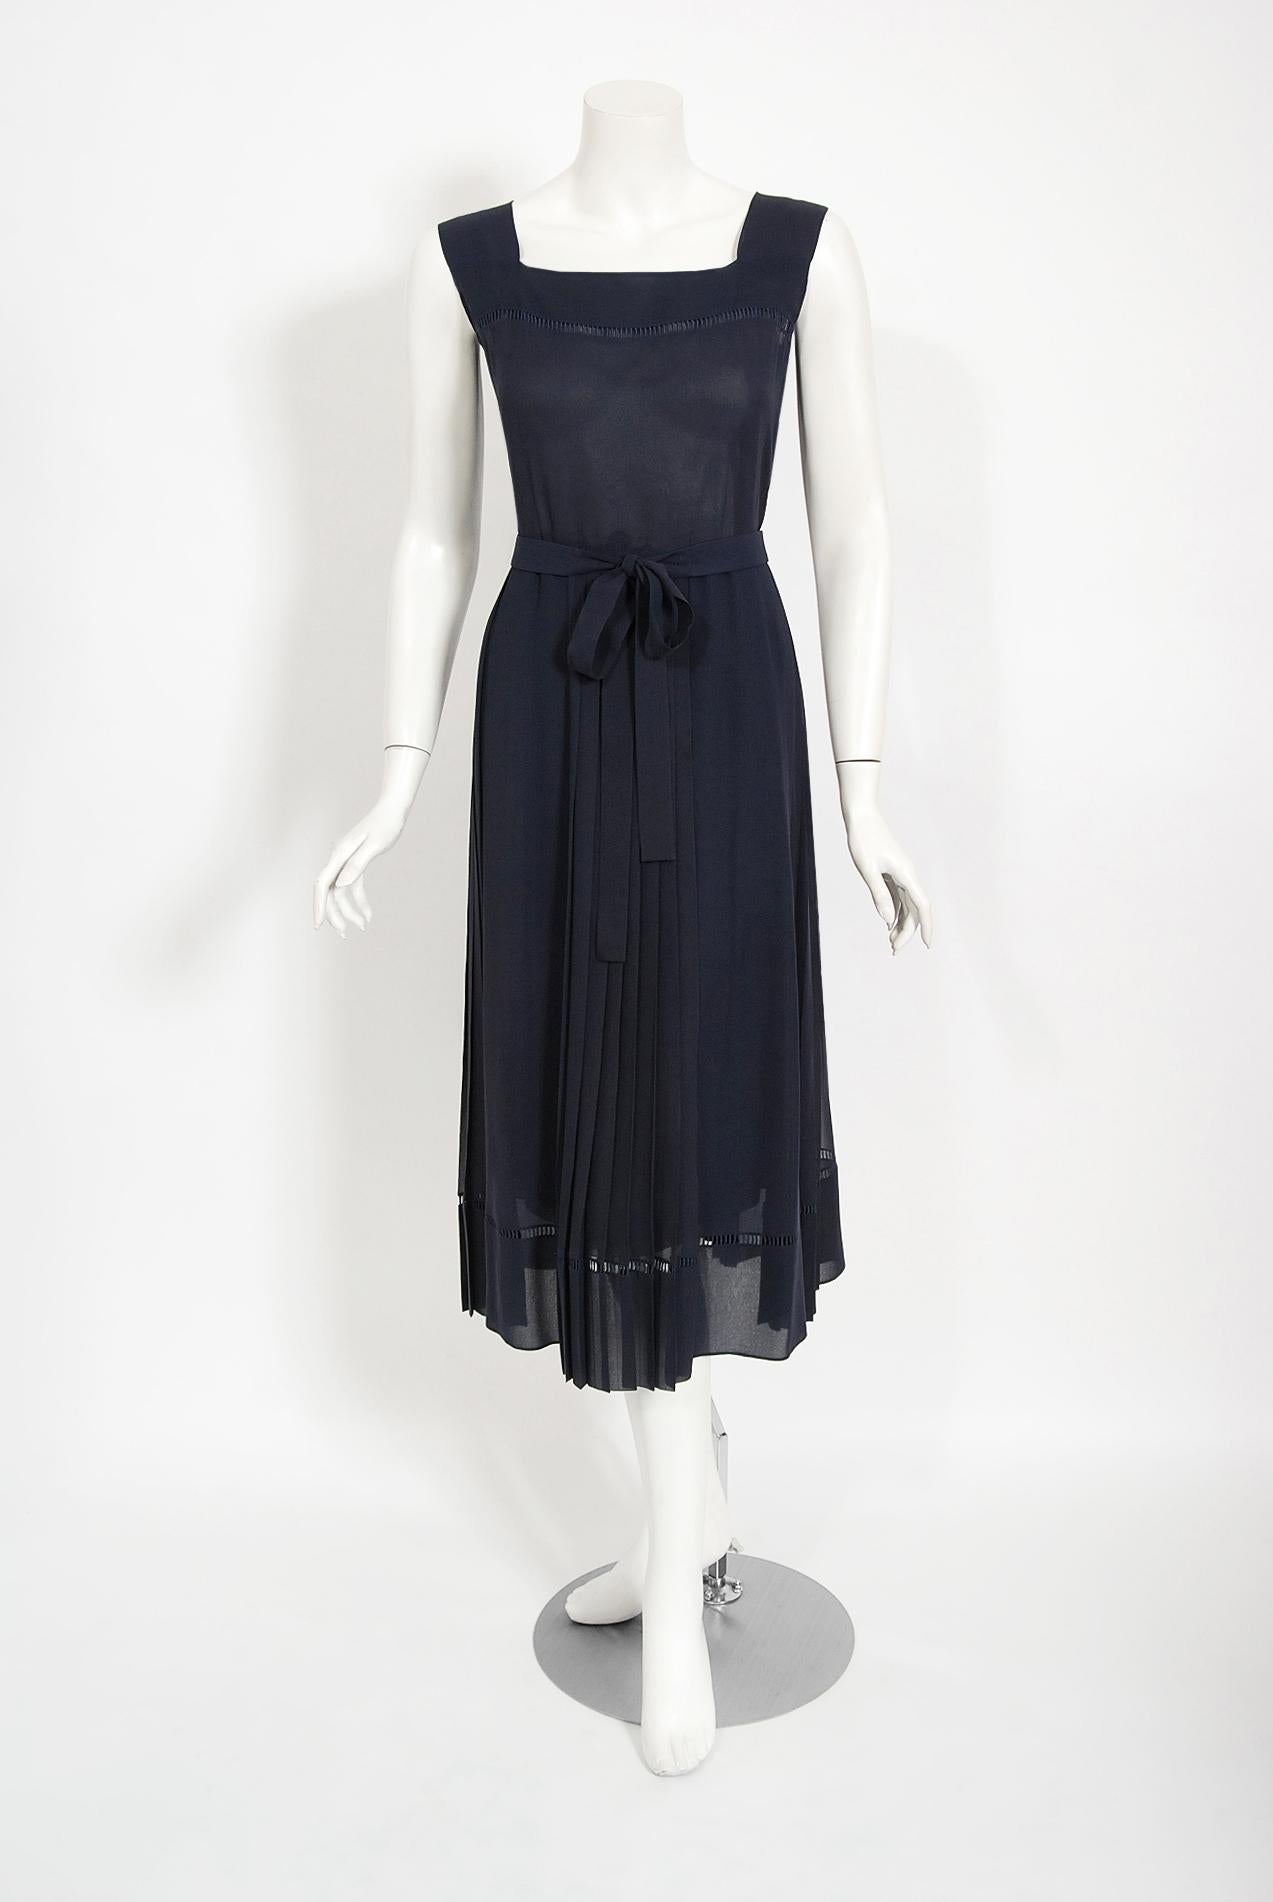 Vintage 1974 Christian Dior Haute Couture Documented Navy Pleated Silk Dress Set 1